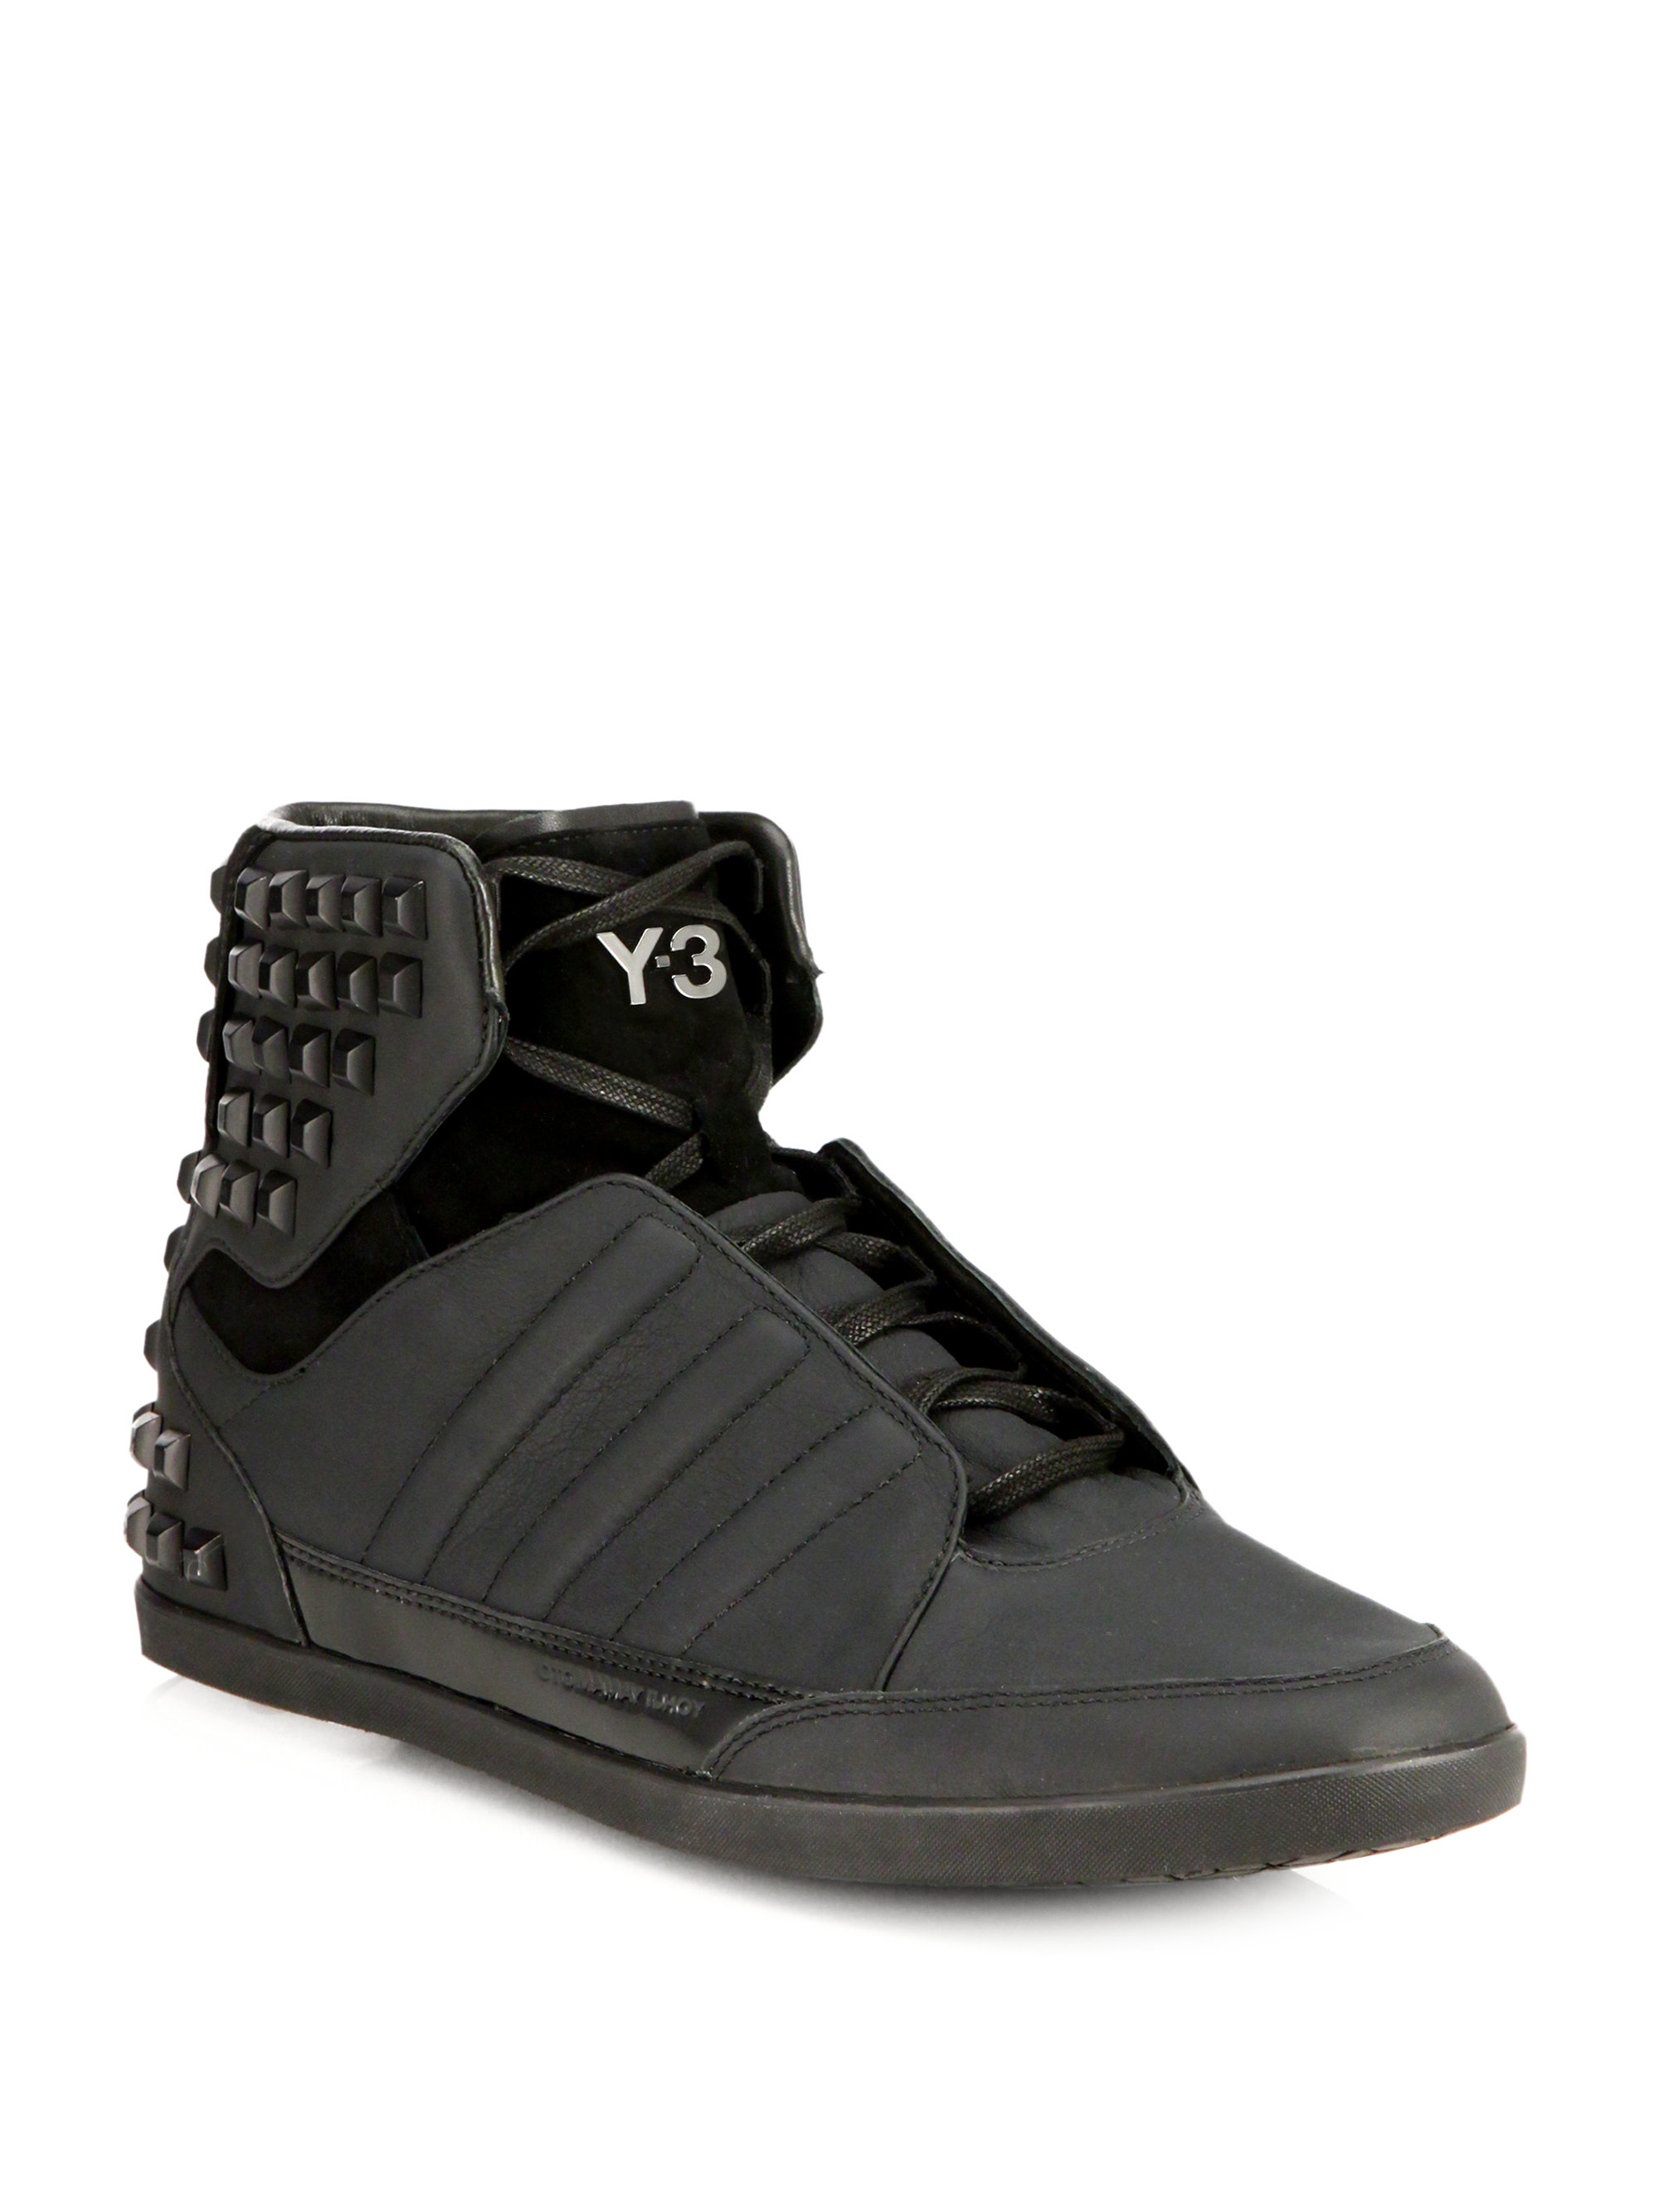 y3 studded sneakers